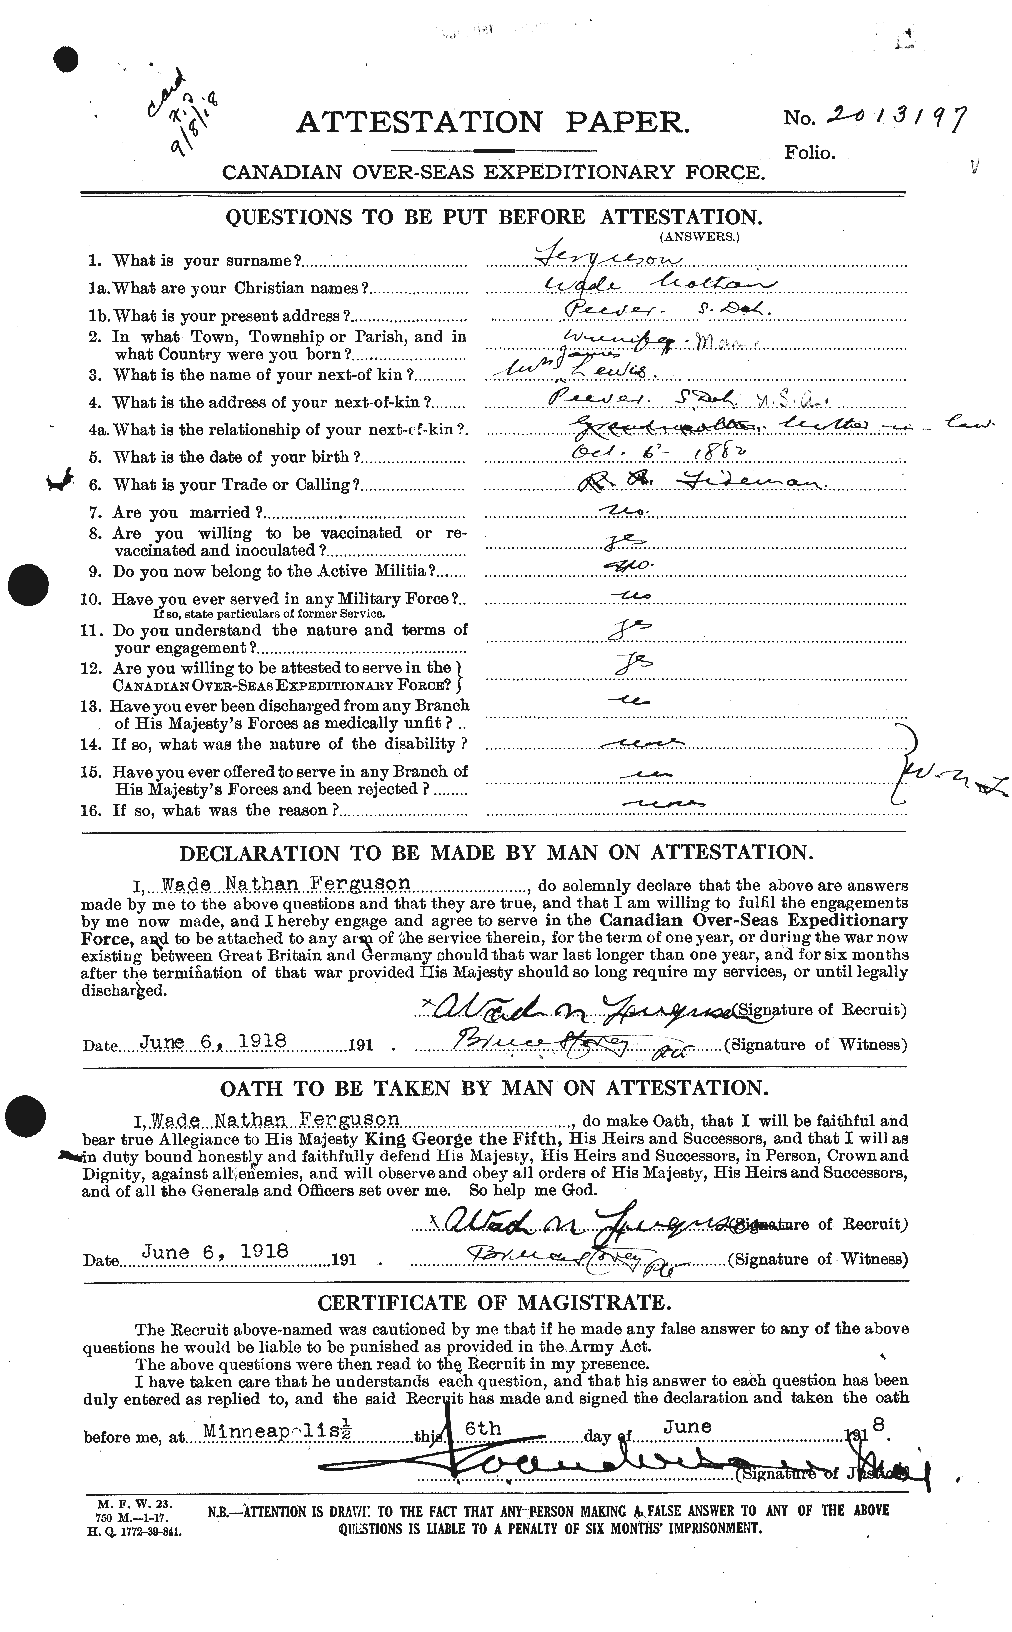 Personnel Records of the First World War - CEF 321704a